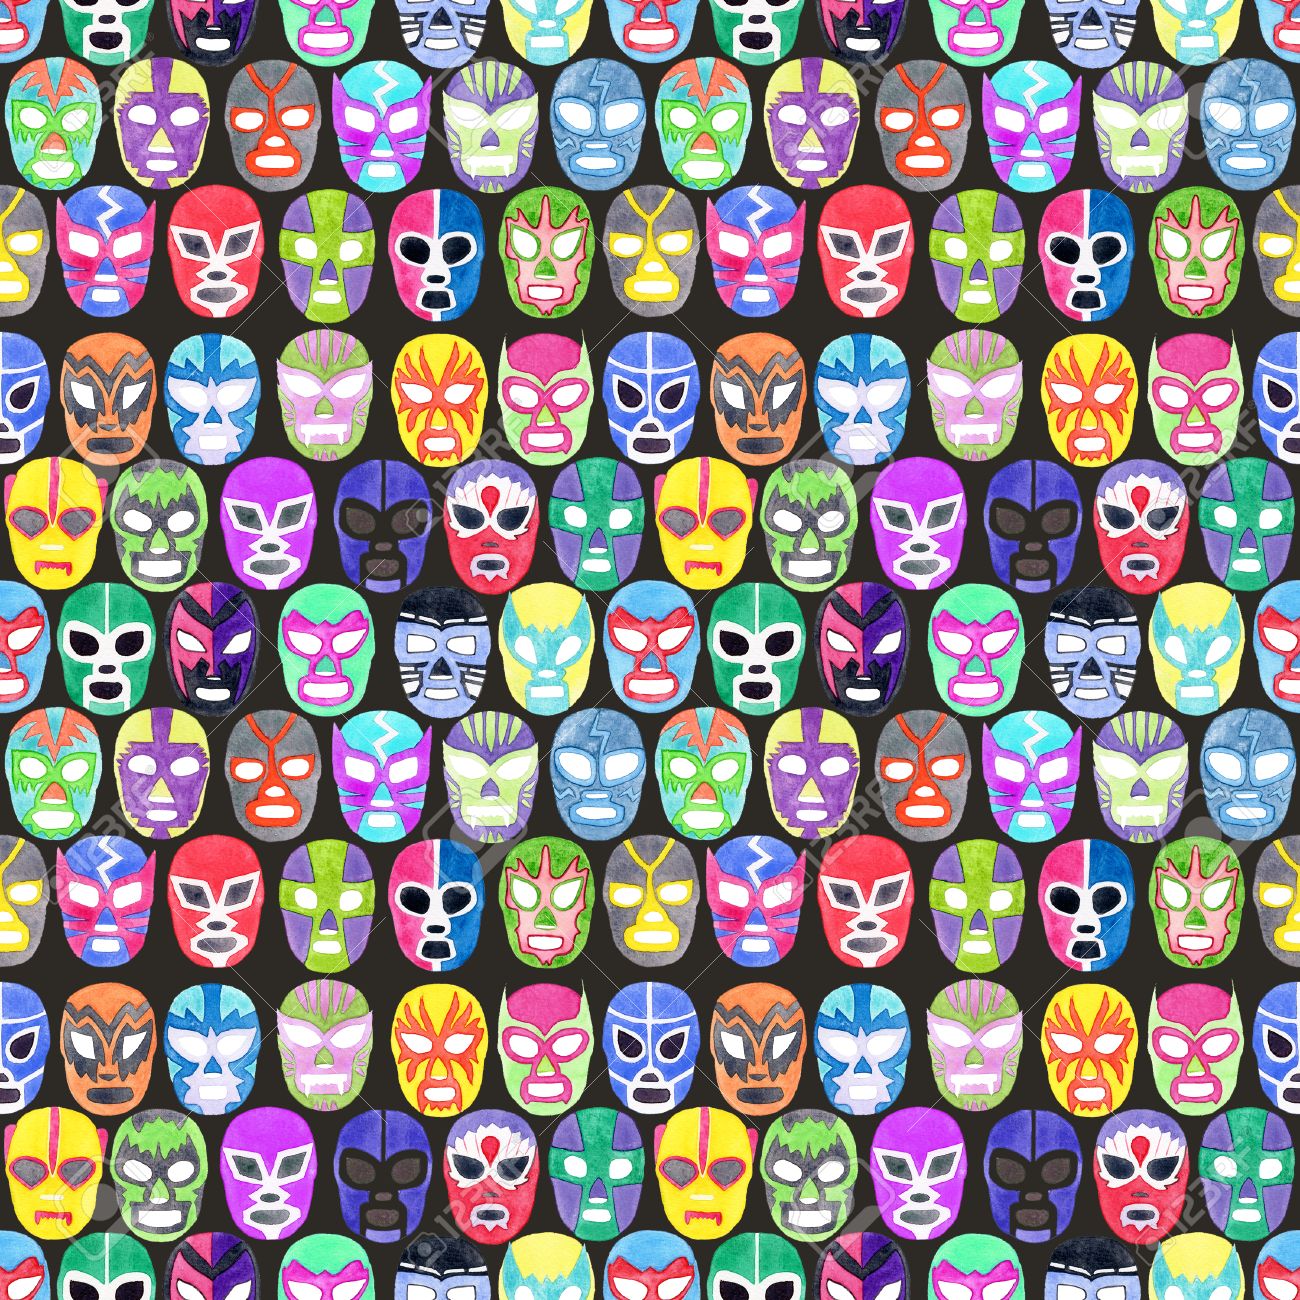 Luchador Or Fighter Mask Set Seamless Pattern With Hand Drawn